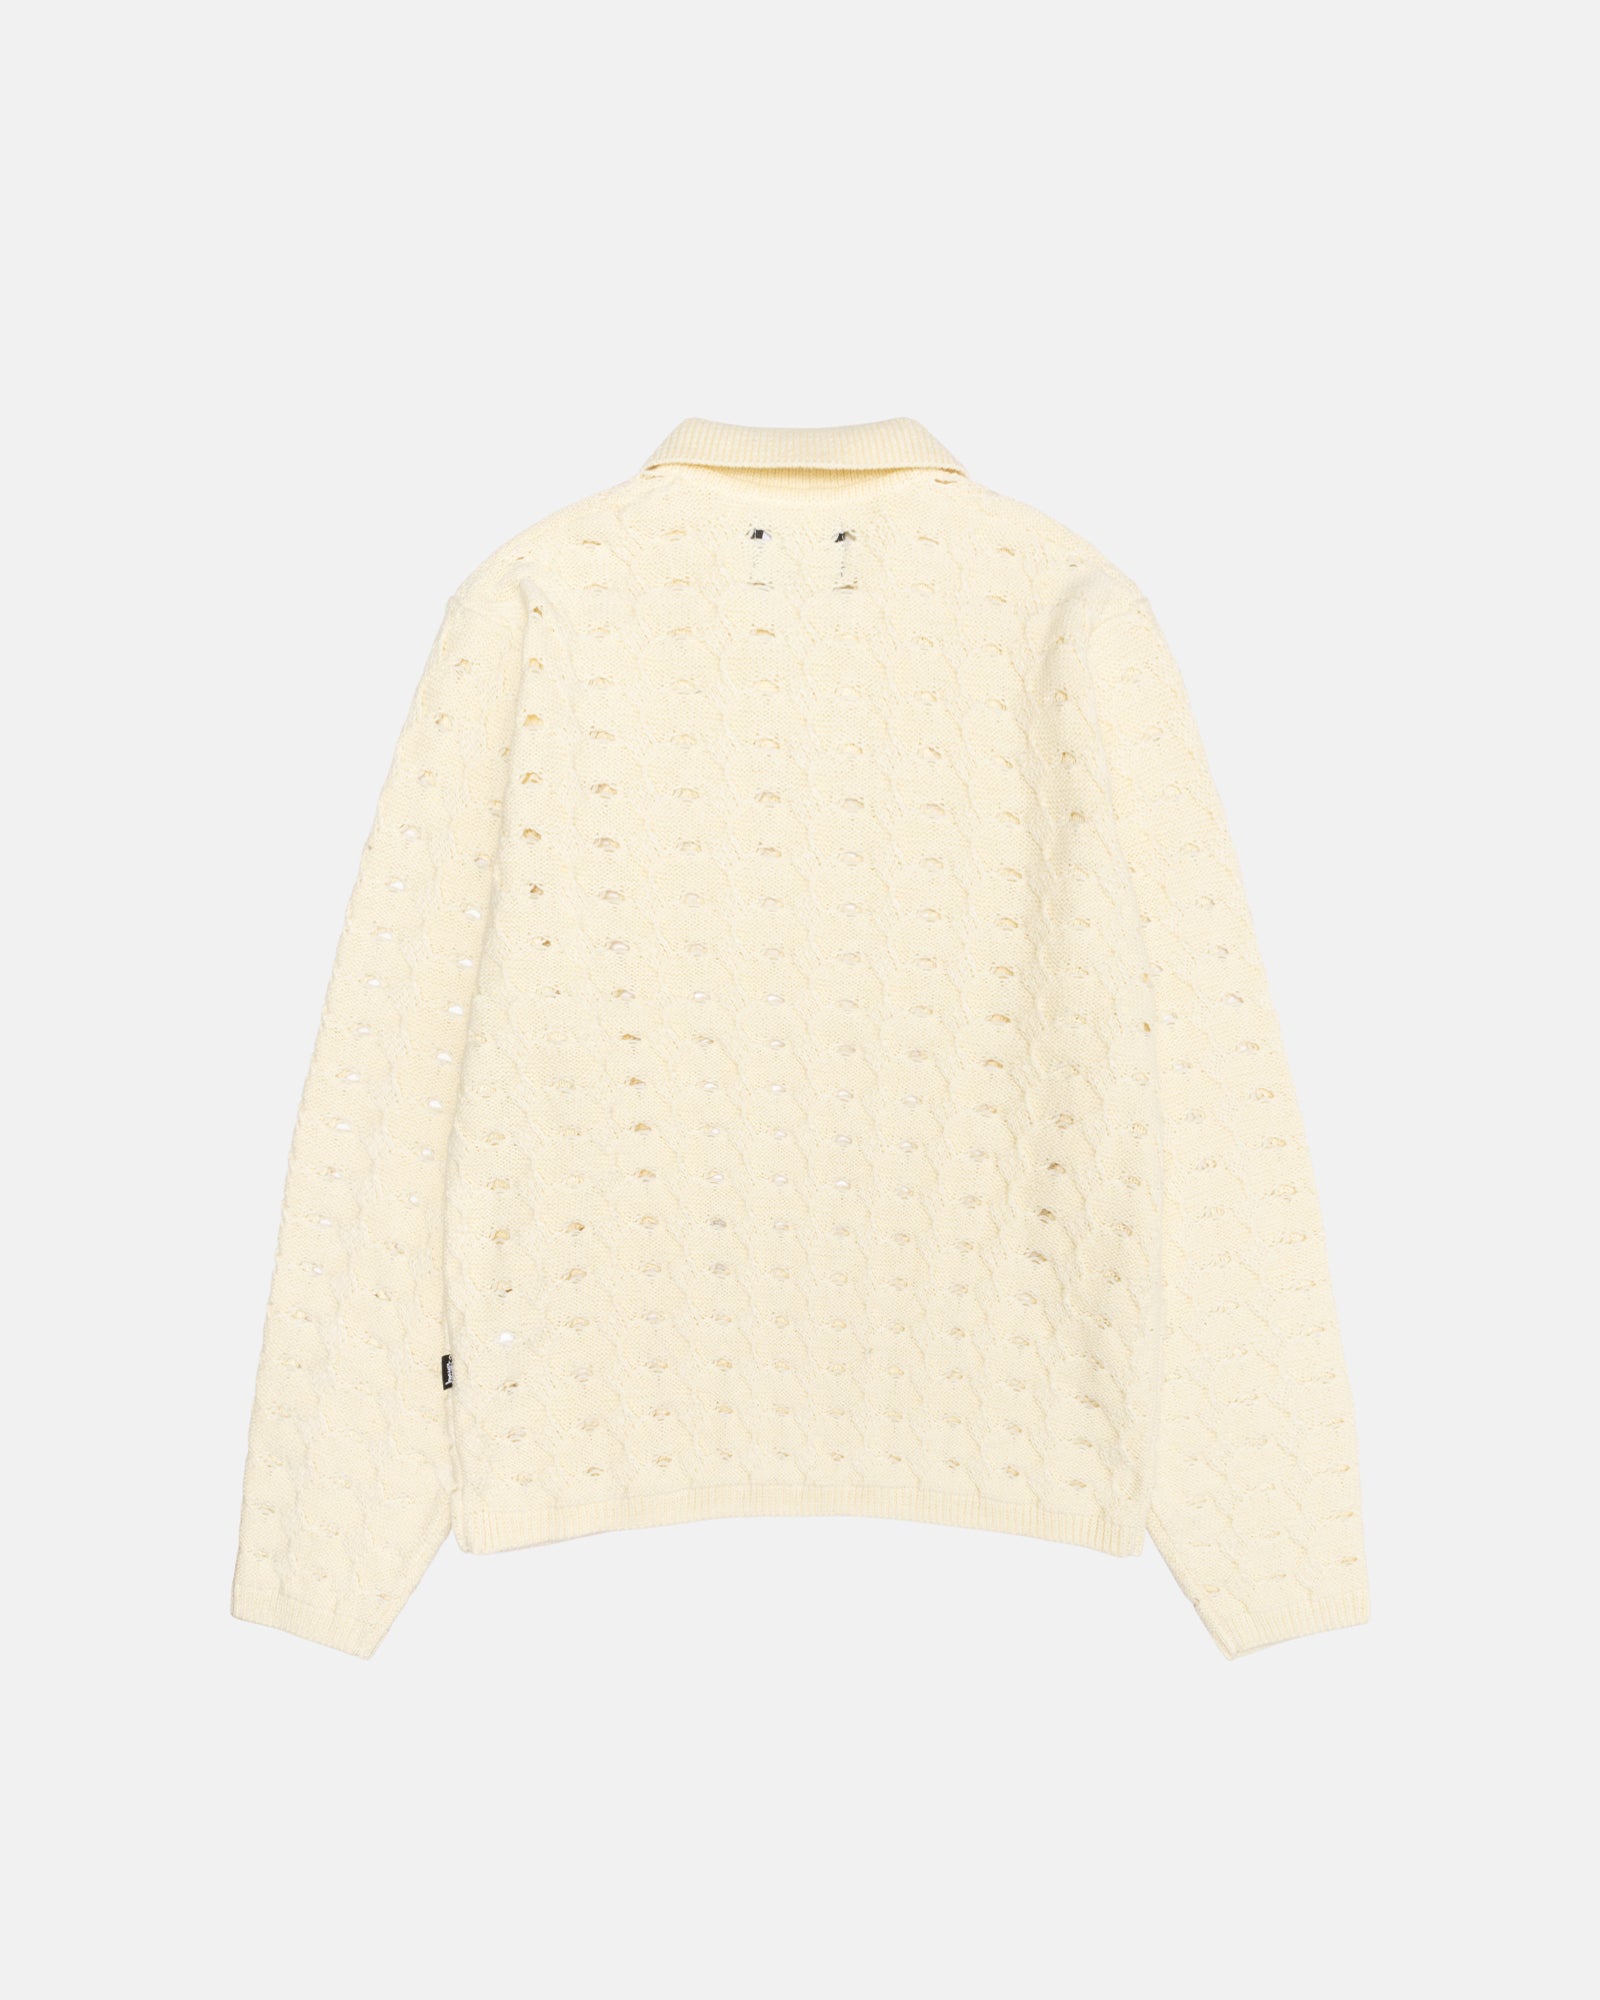 OPEN KNIT COLLARED SWEATER IVORY SWEATER